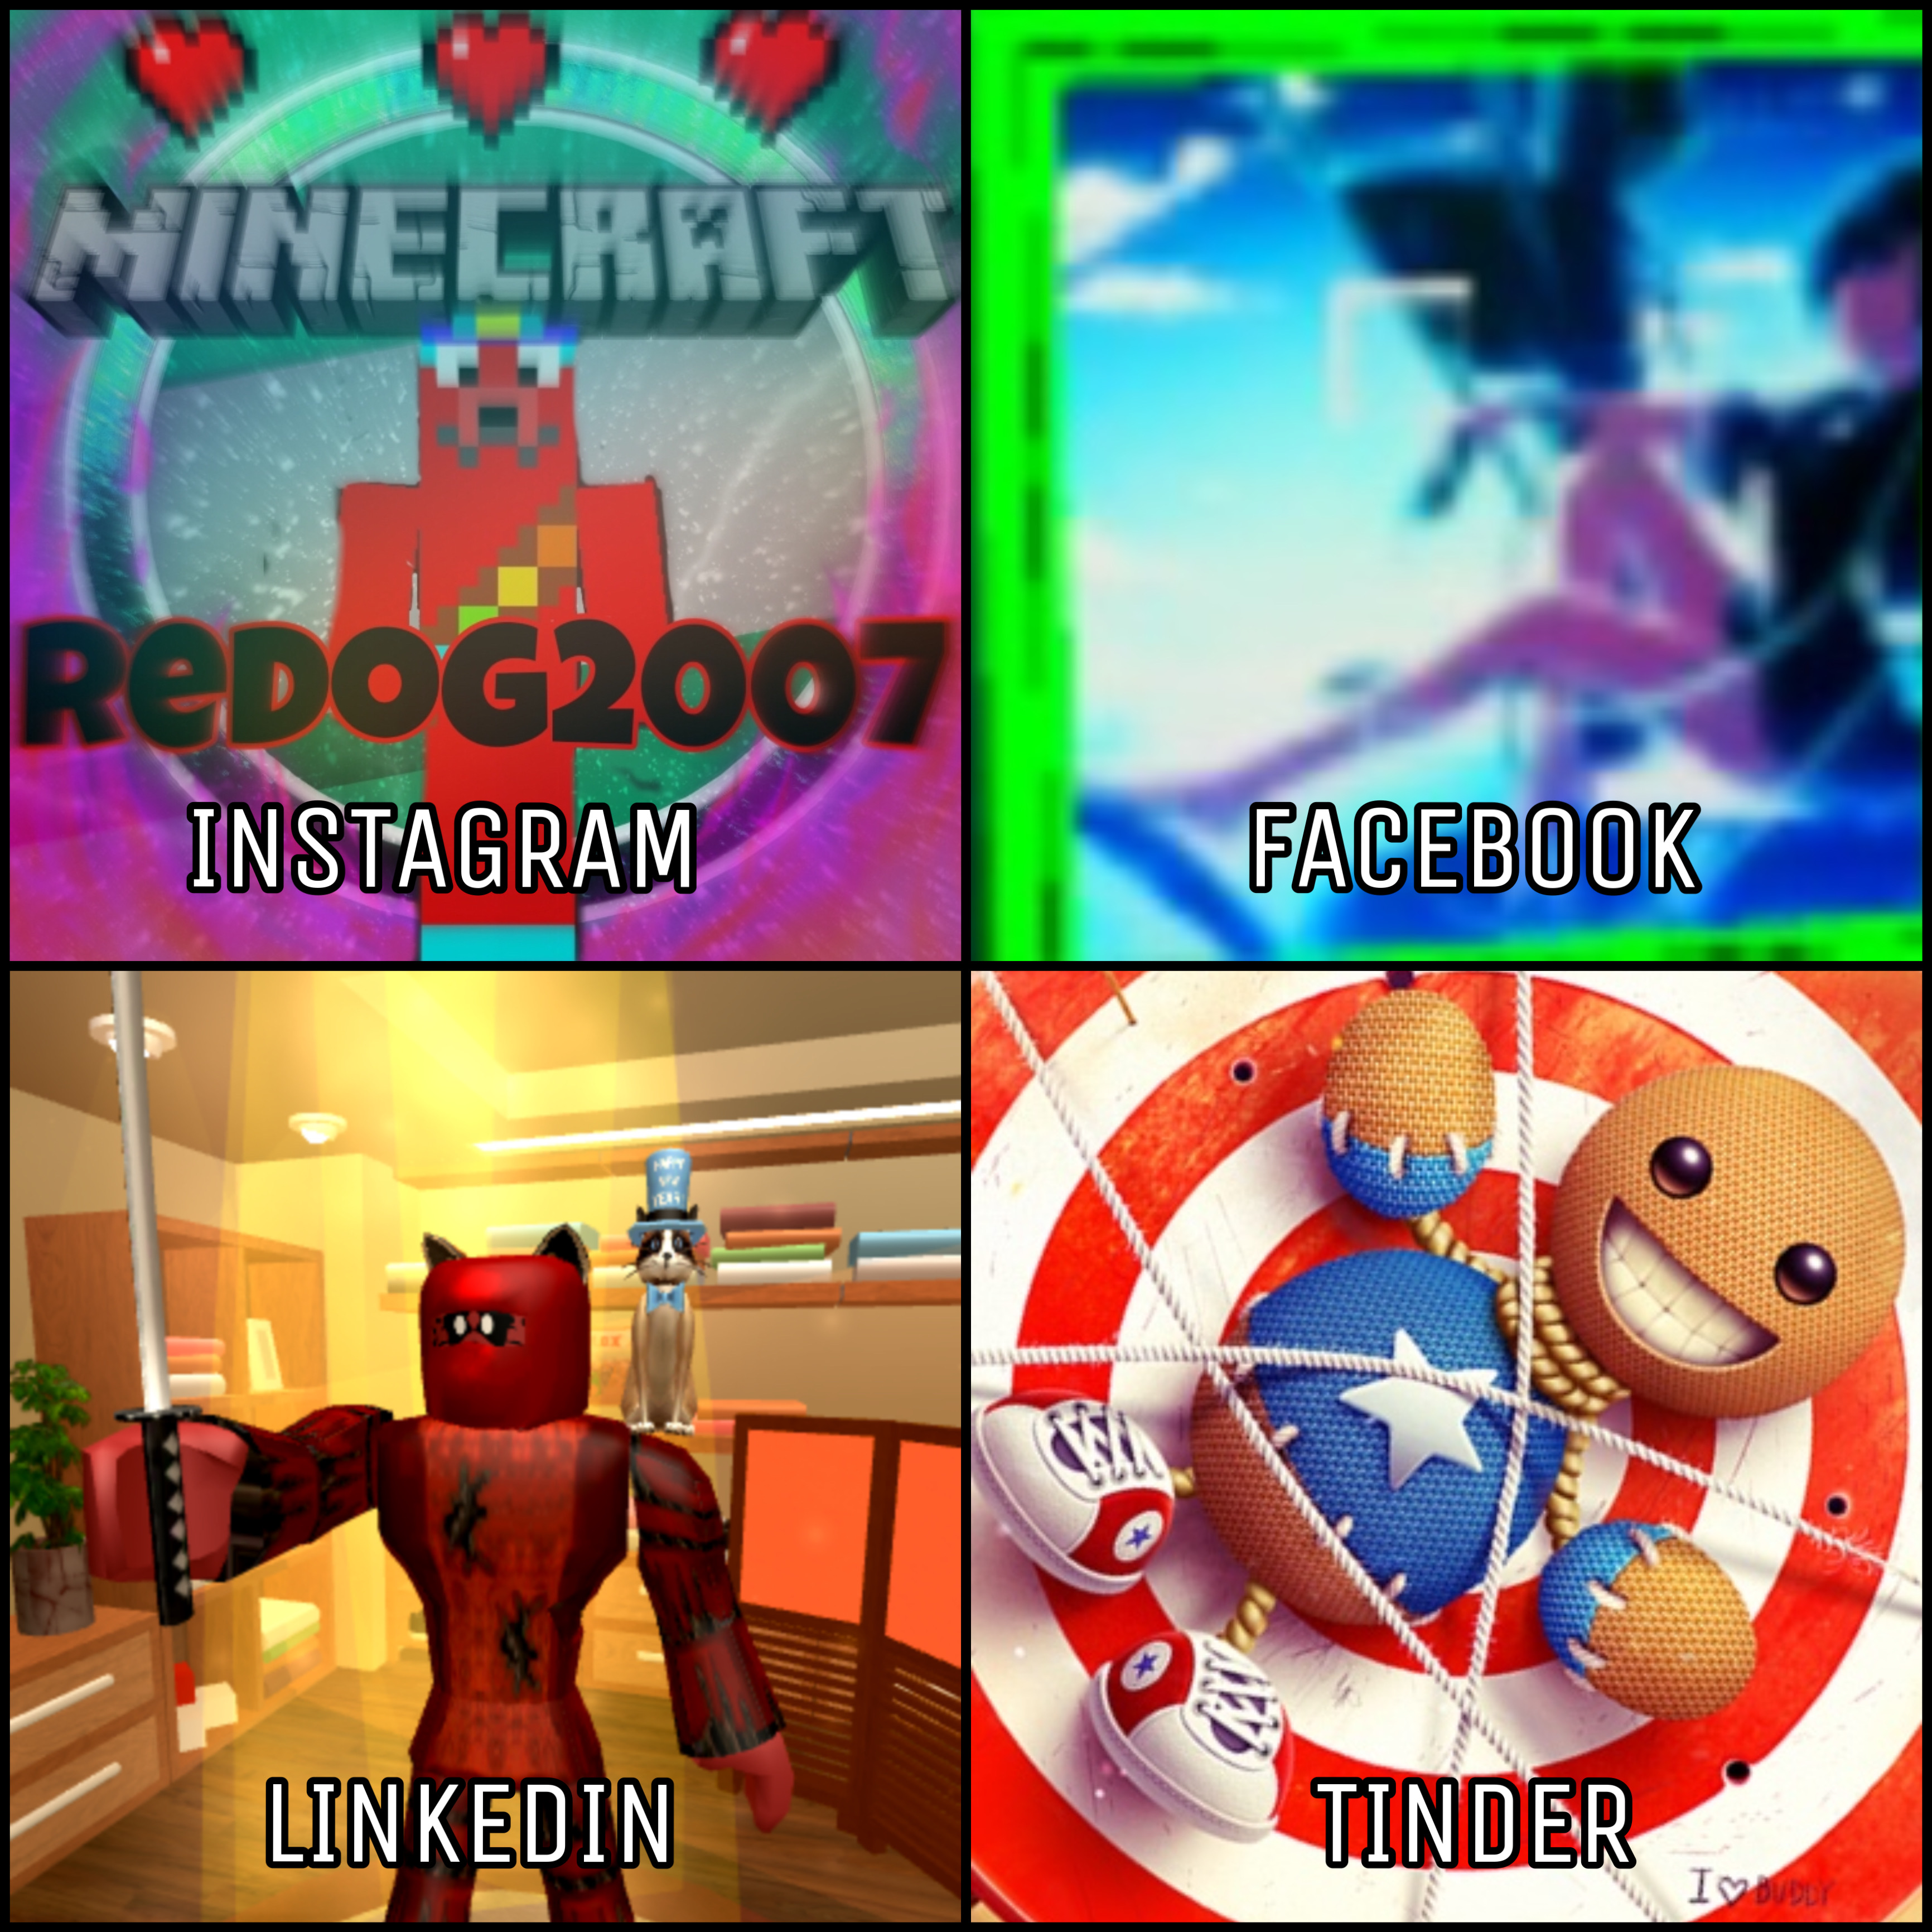 Roblox Minecarft Kickthebuddy Games Image By Redog2007 - roblox exposure in game